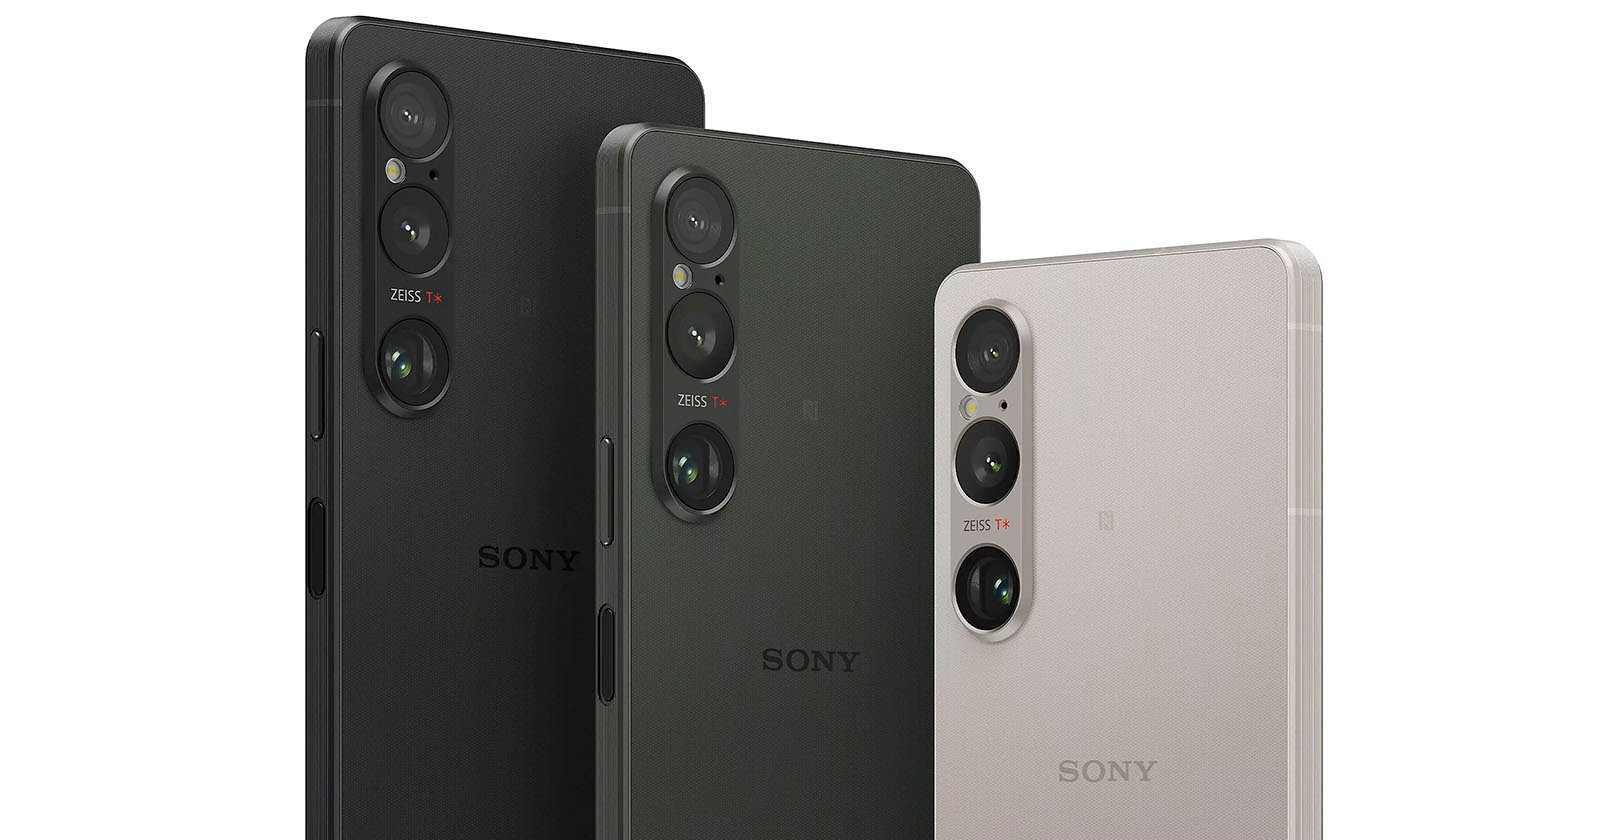 Three Sony smartphones are shown from the back at an angle, highlighting their triple camera setups. The phones come in three colors: black, dark green, and white. The camera modules are labeled with the branding "ZEISS T*.